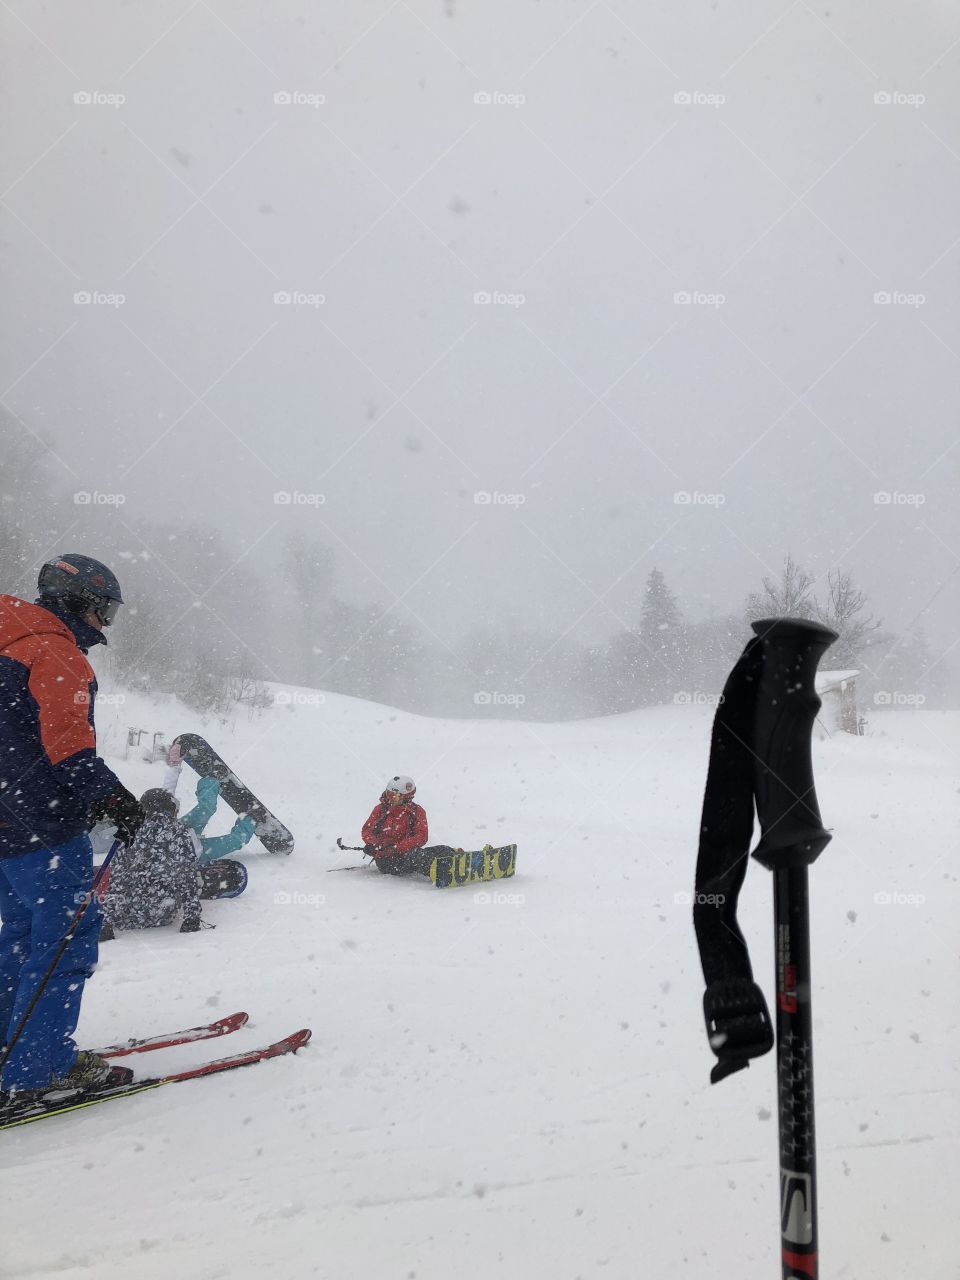 Skiing in a storm 